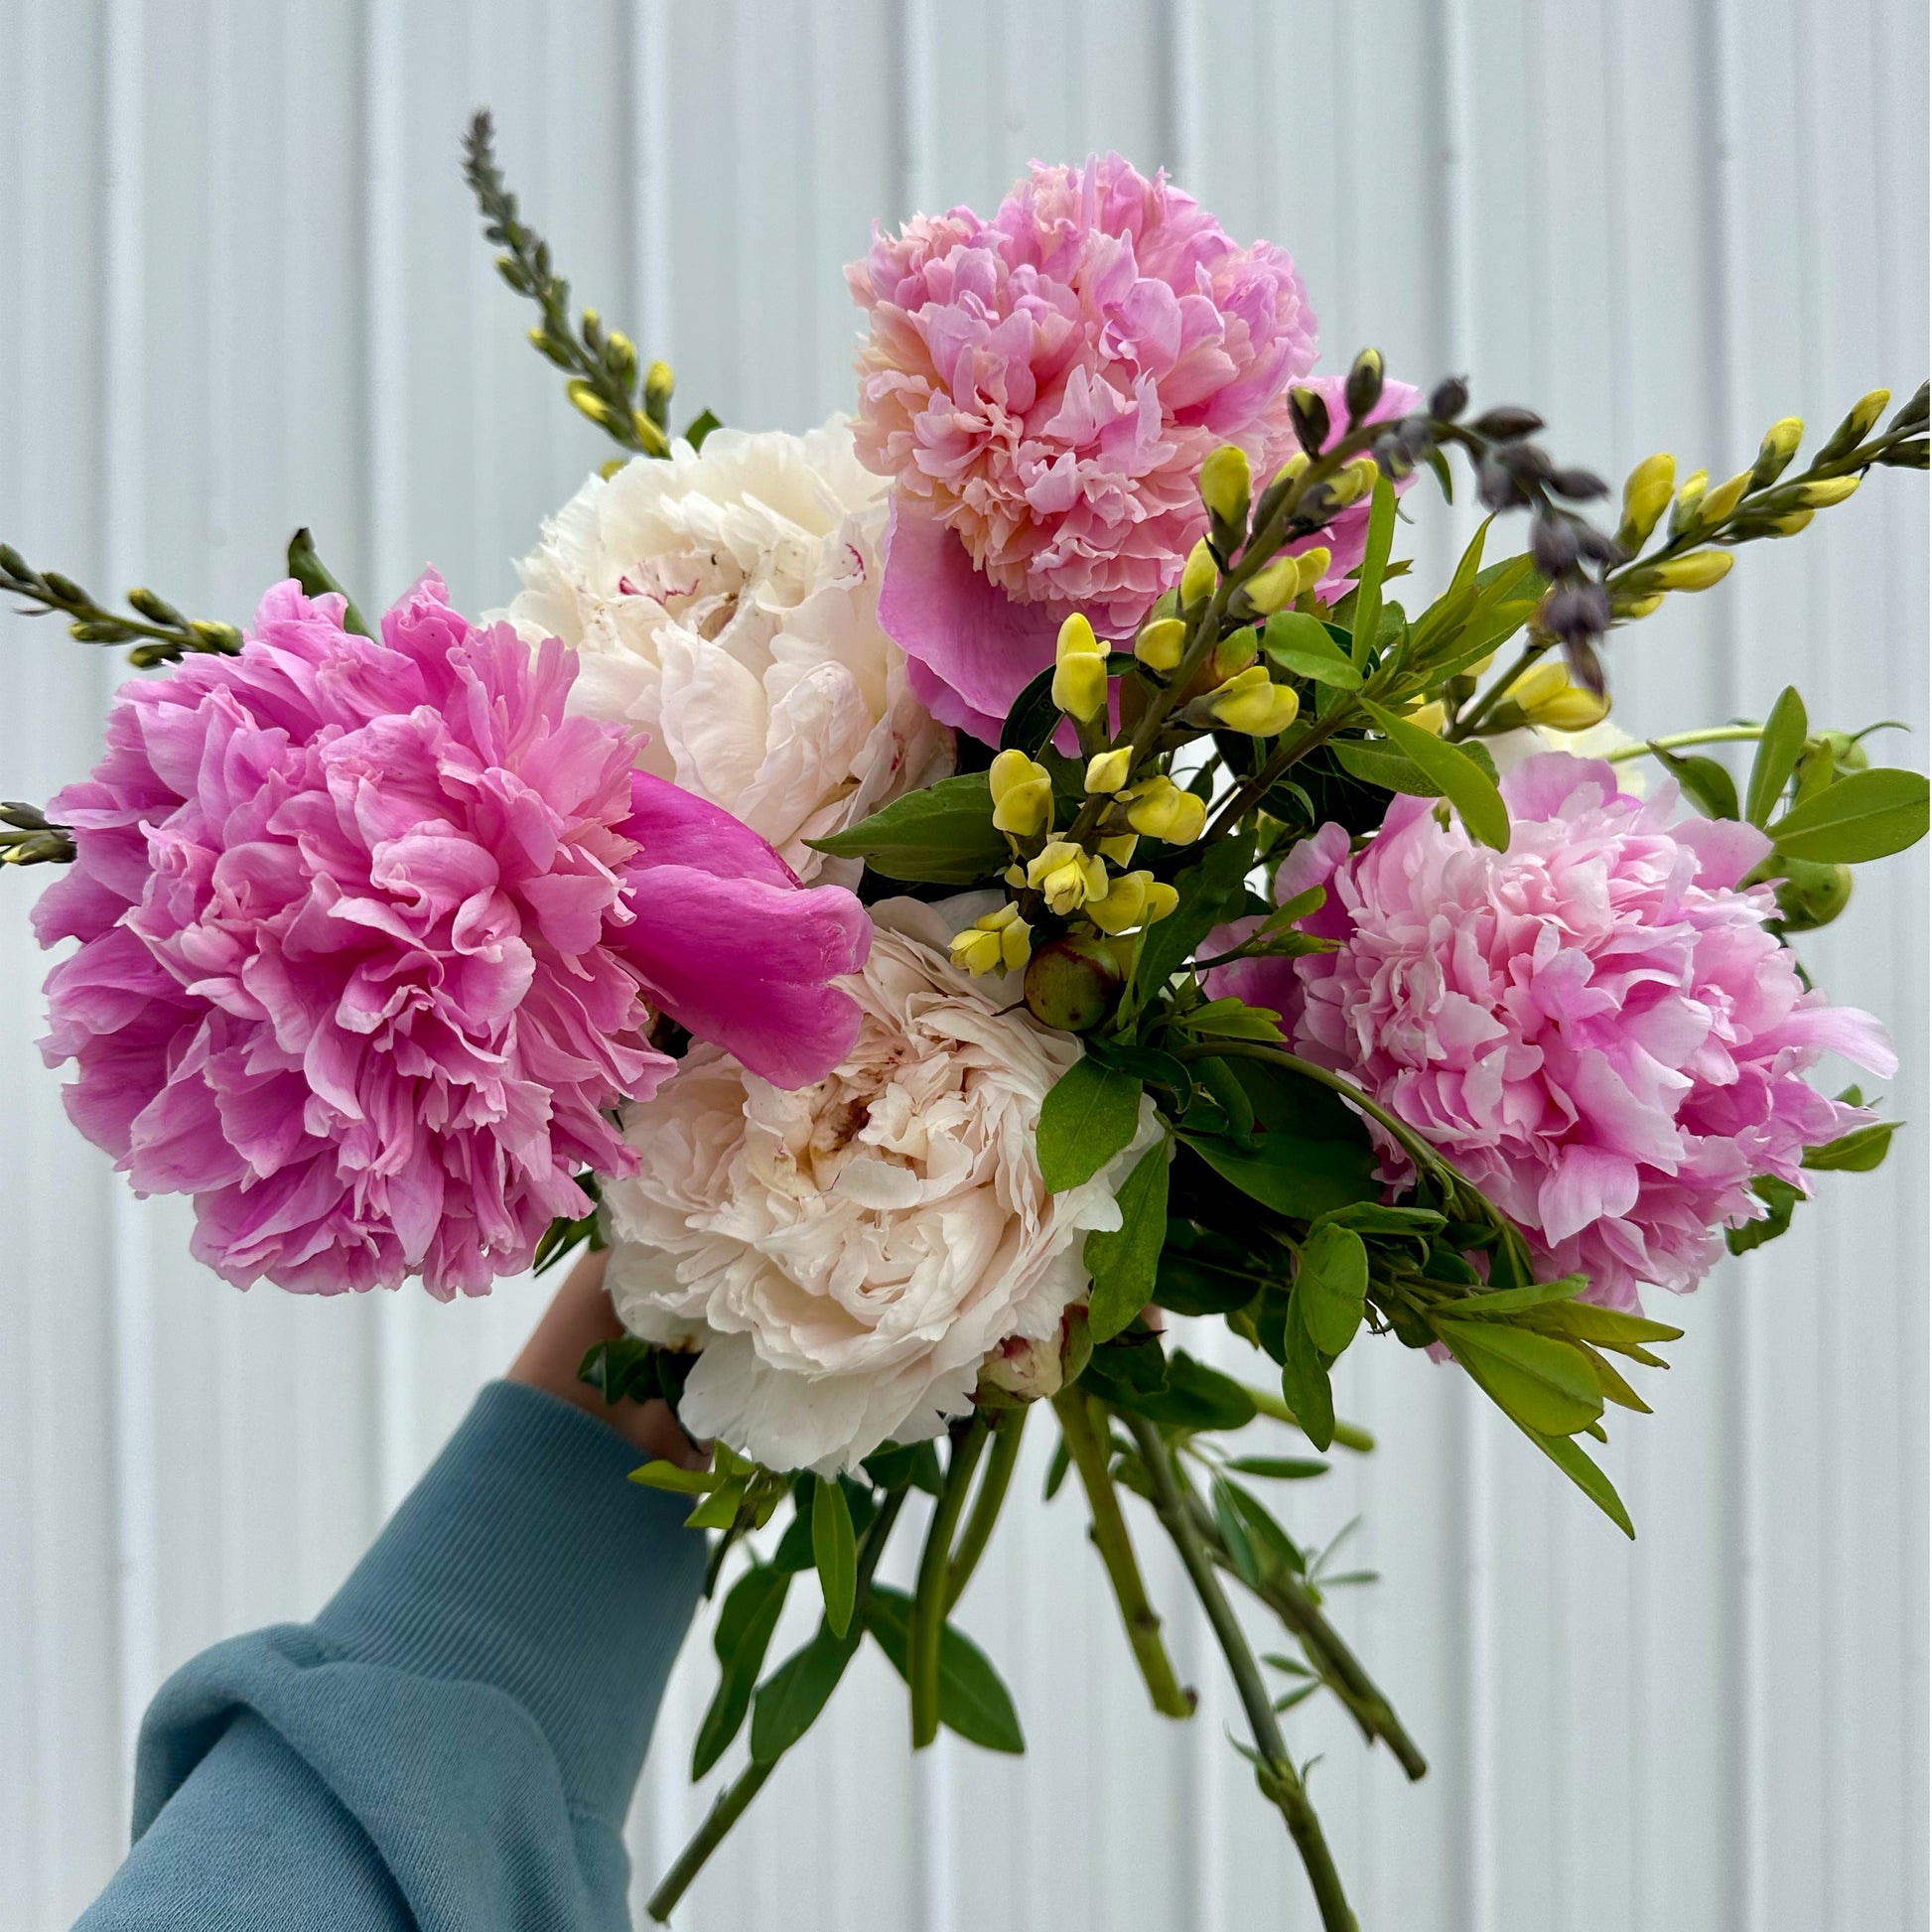 Pink and white peonies with yellow baptisia flowers.